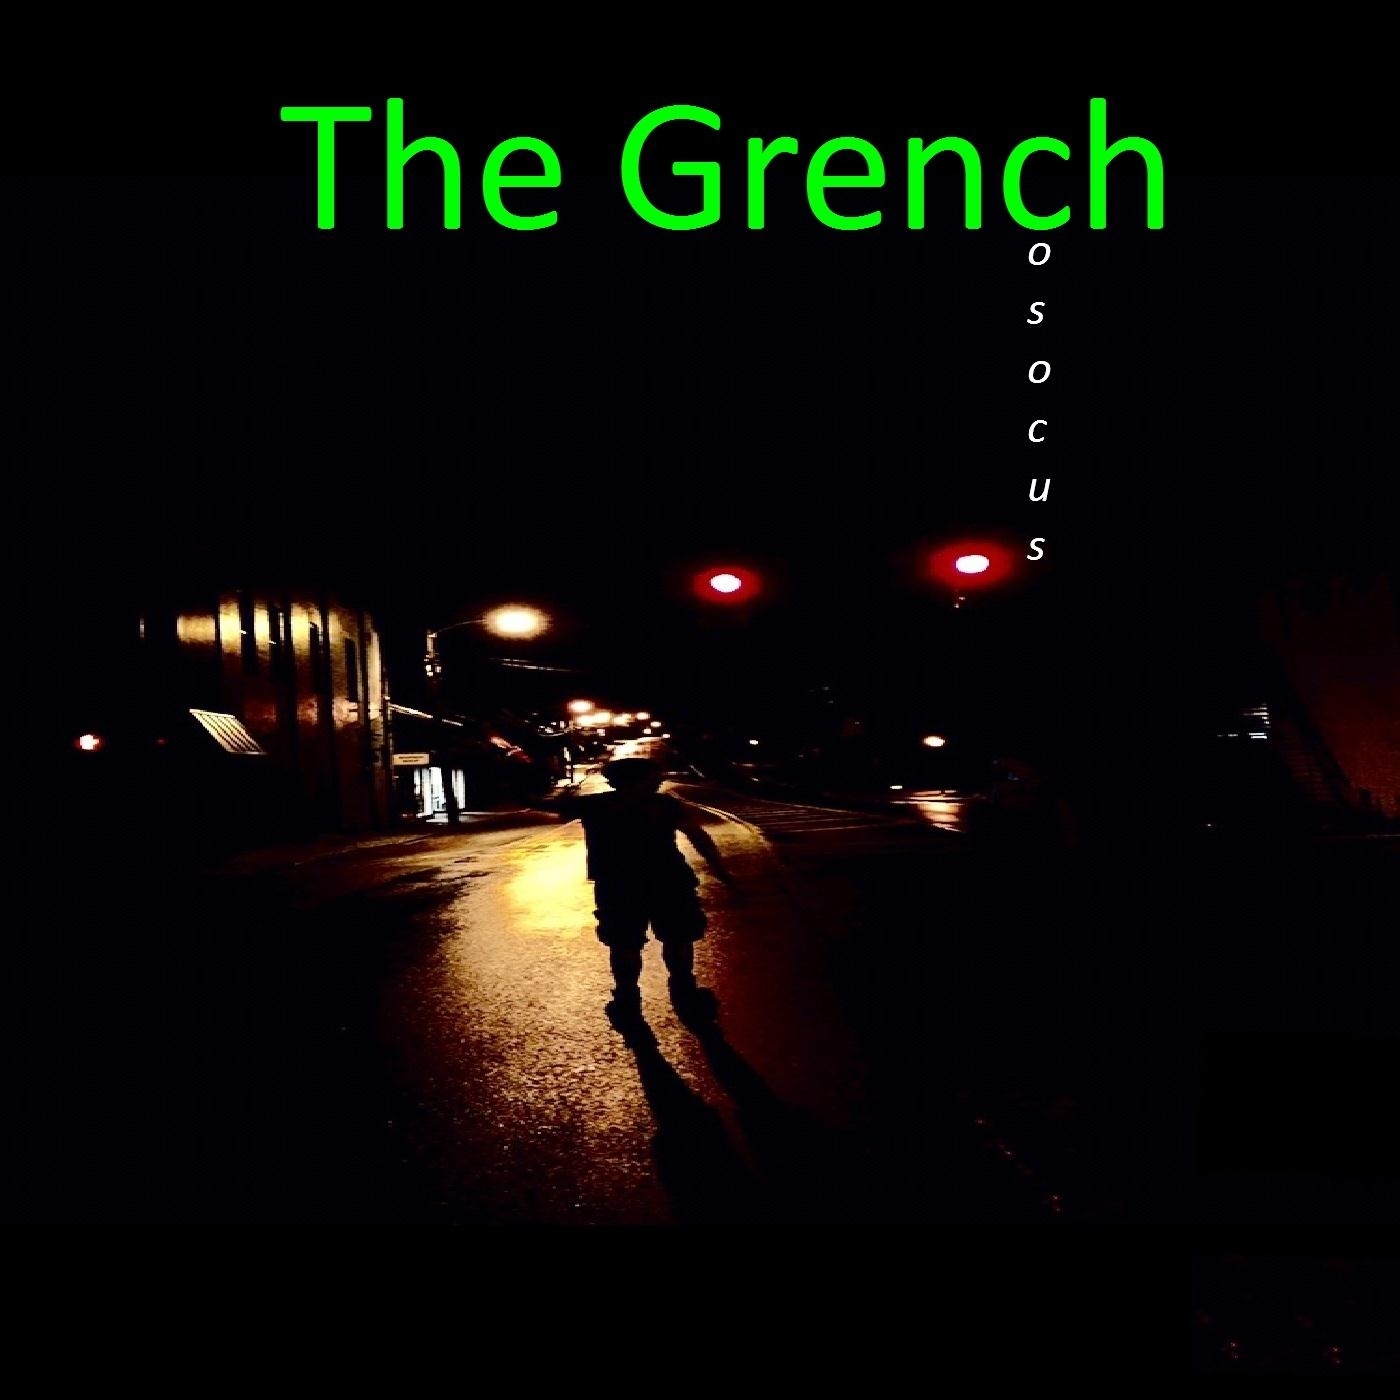 The Grench